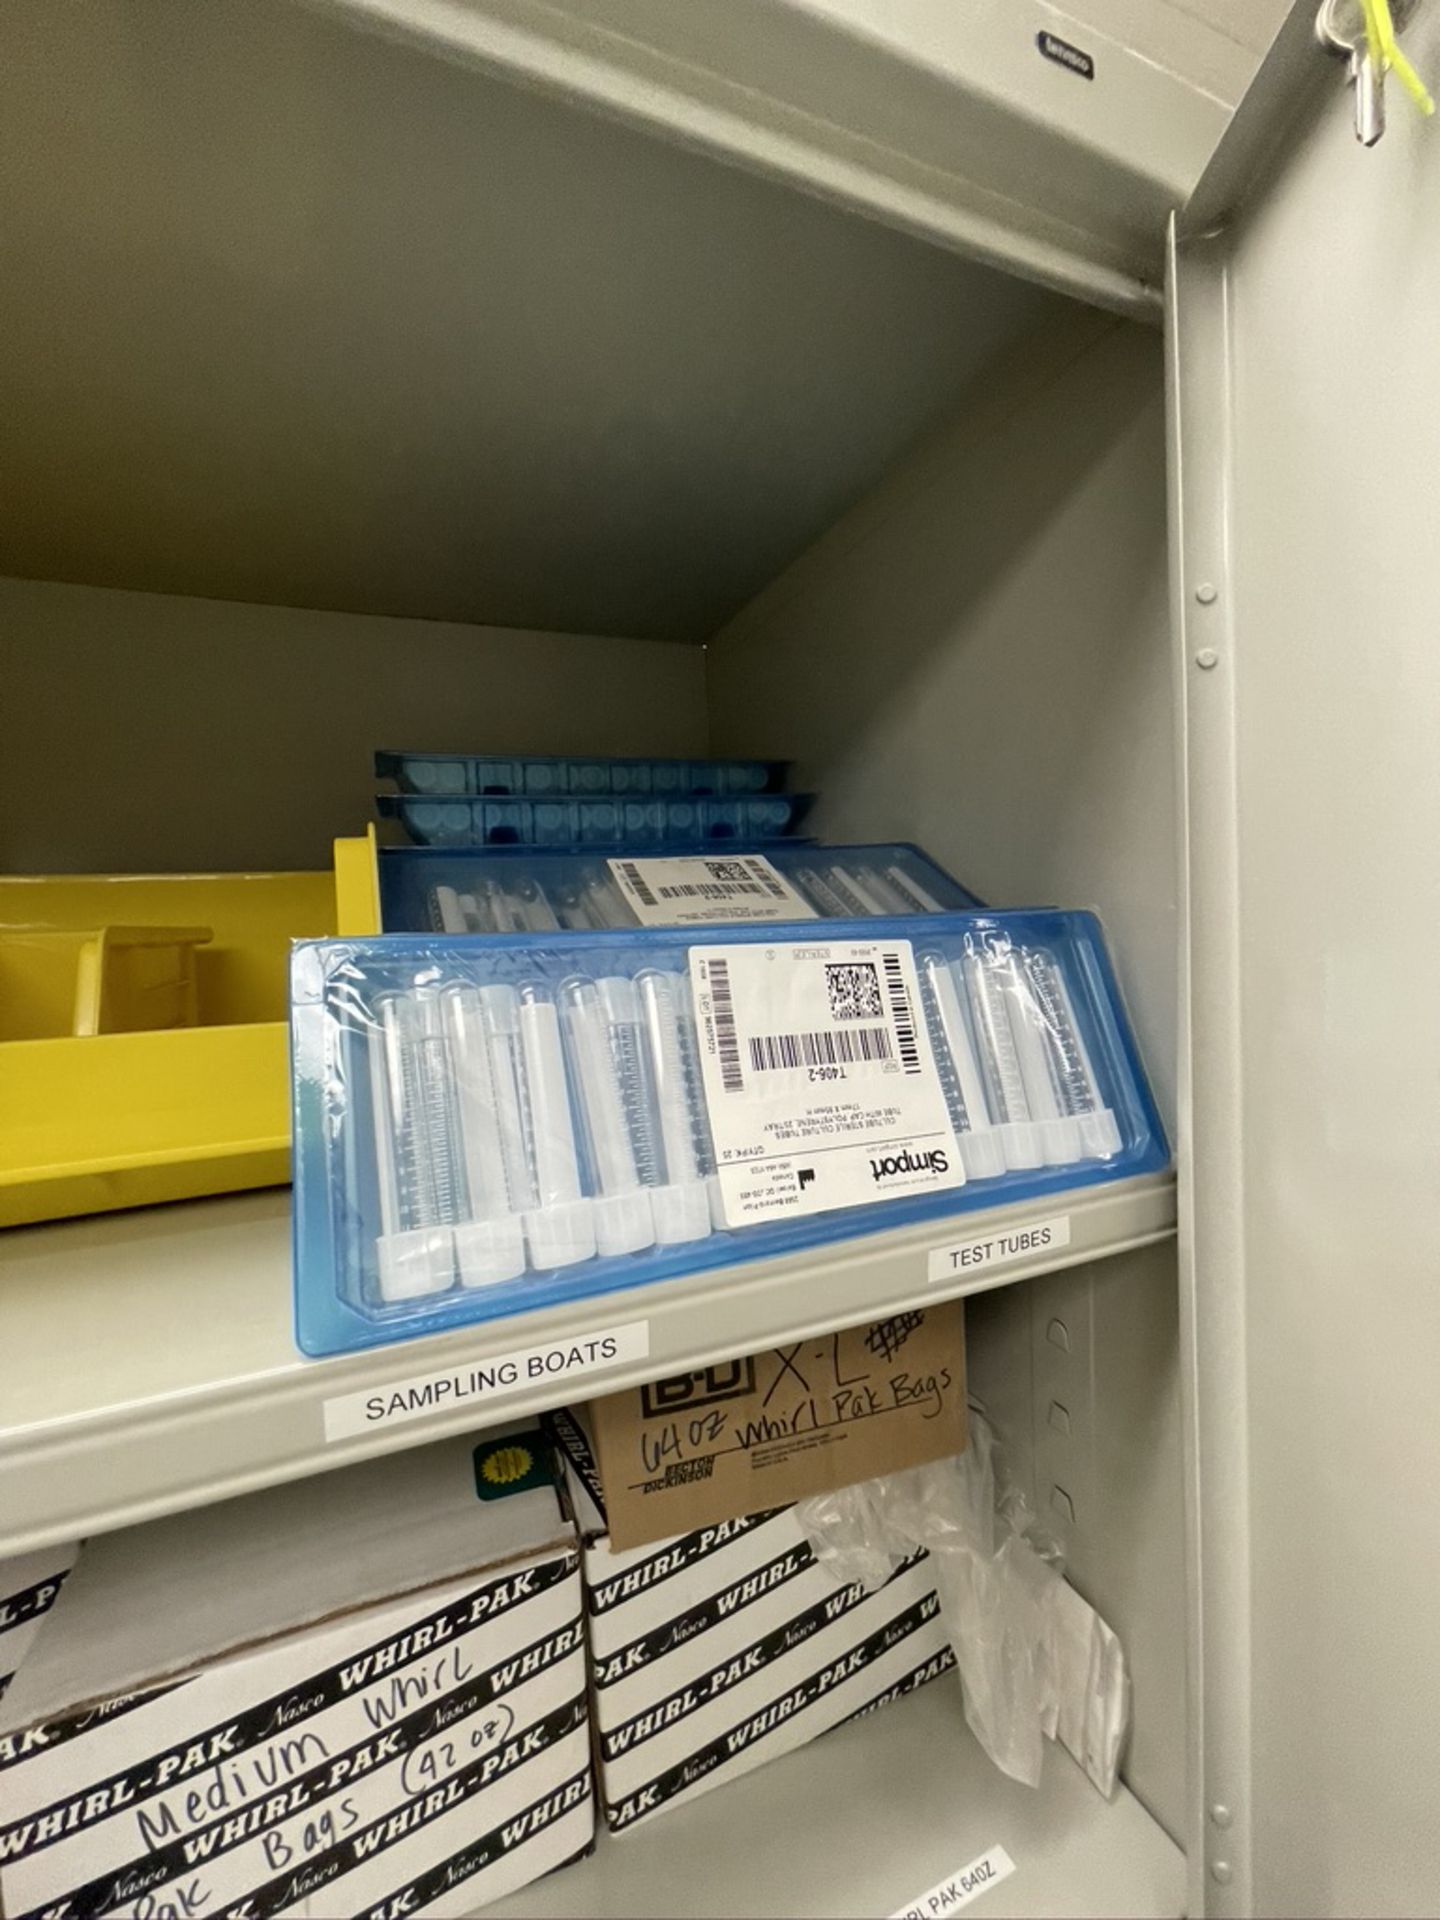 CONTENTS OF SHELF INCLUDING VARIOUS LAB SUPPLIES, TEST TUBES, DISPOSABLE TRIERS AND MORE. - Image 8 of 8